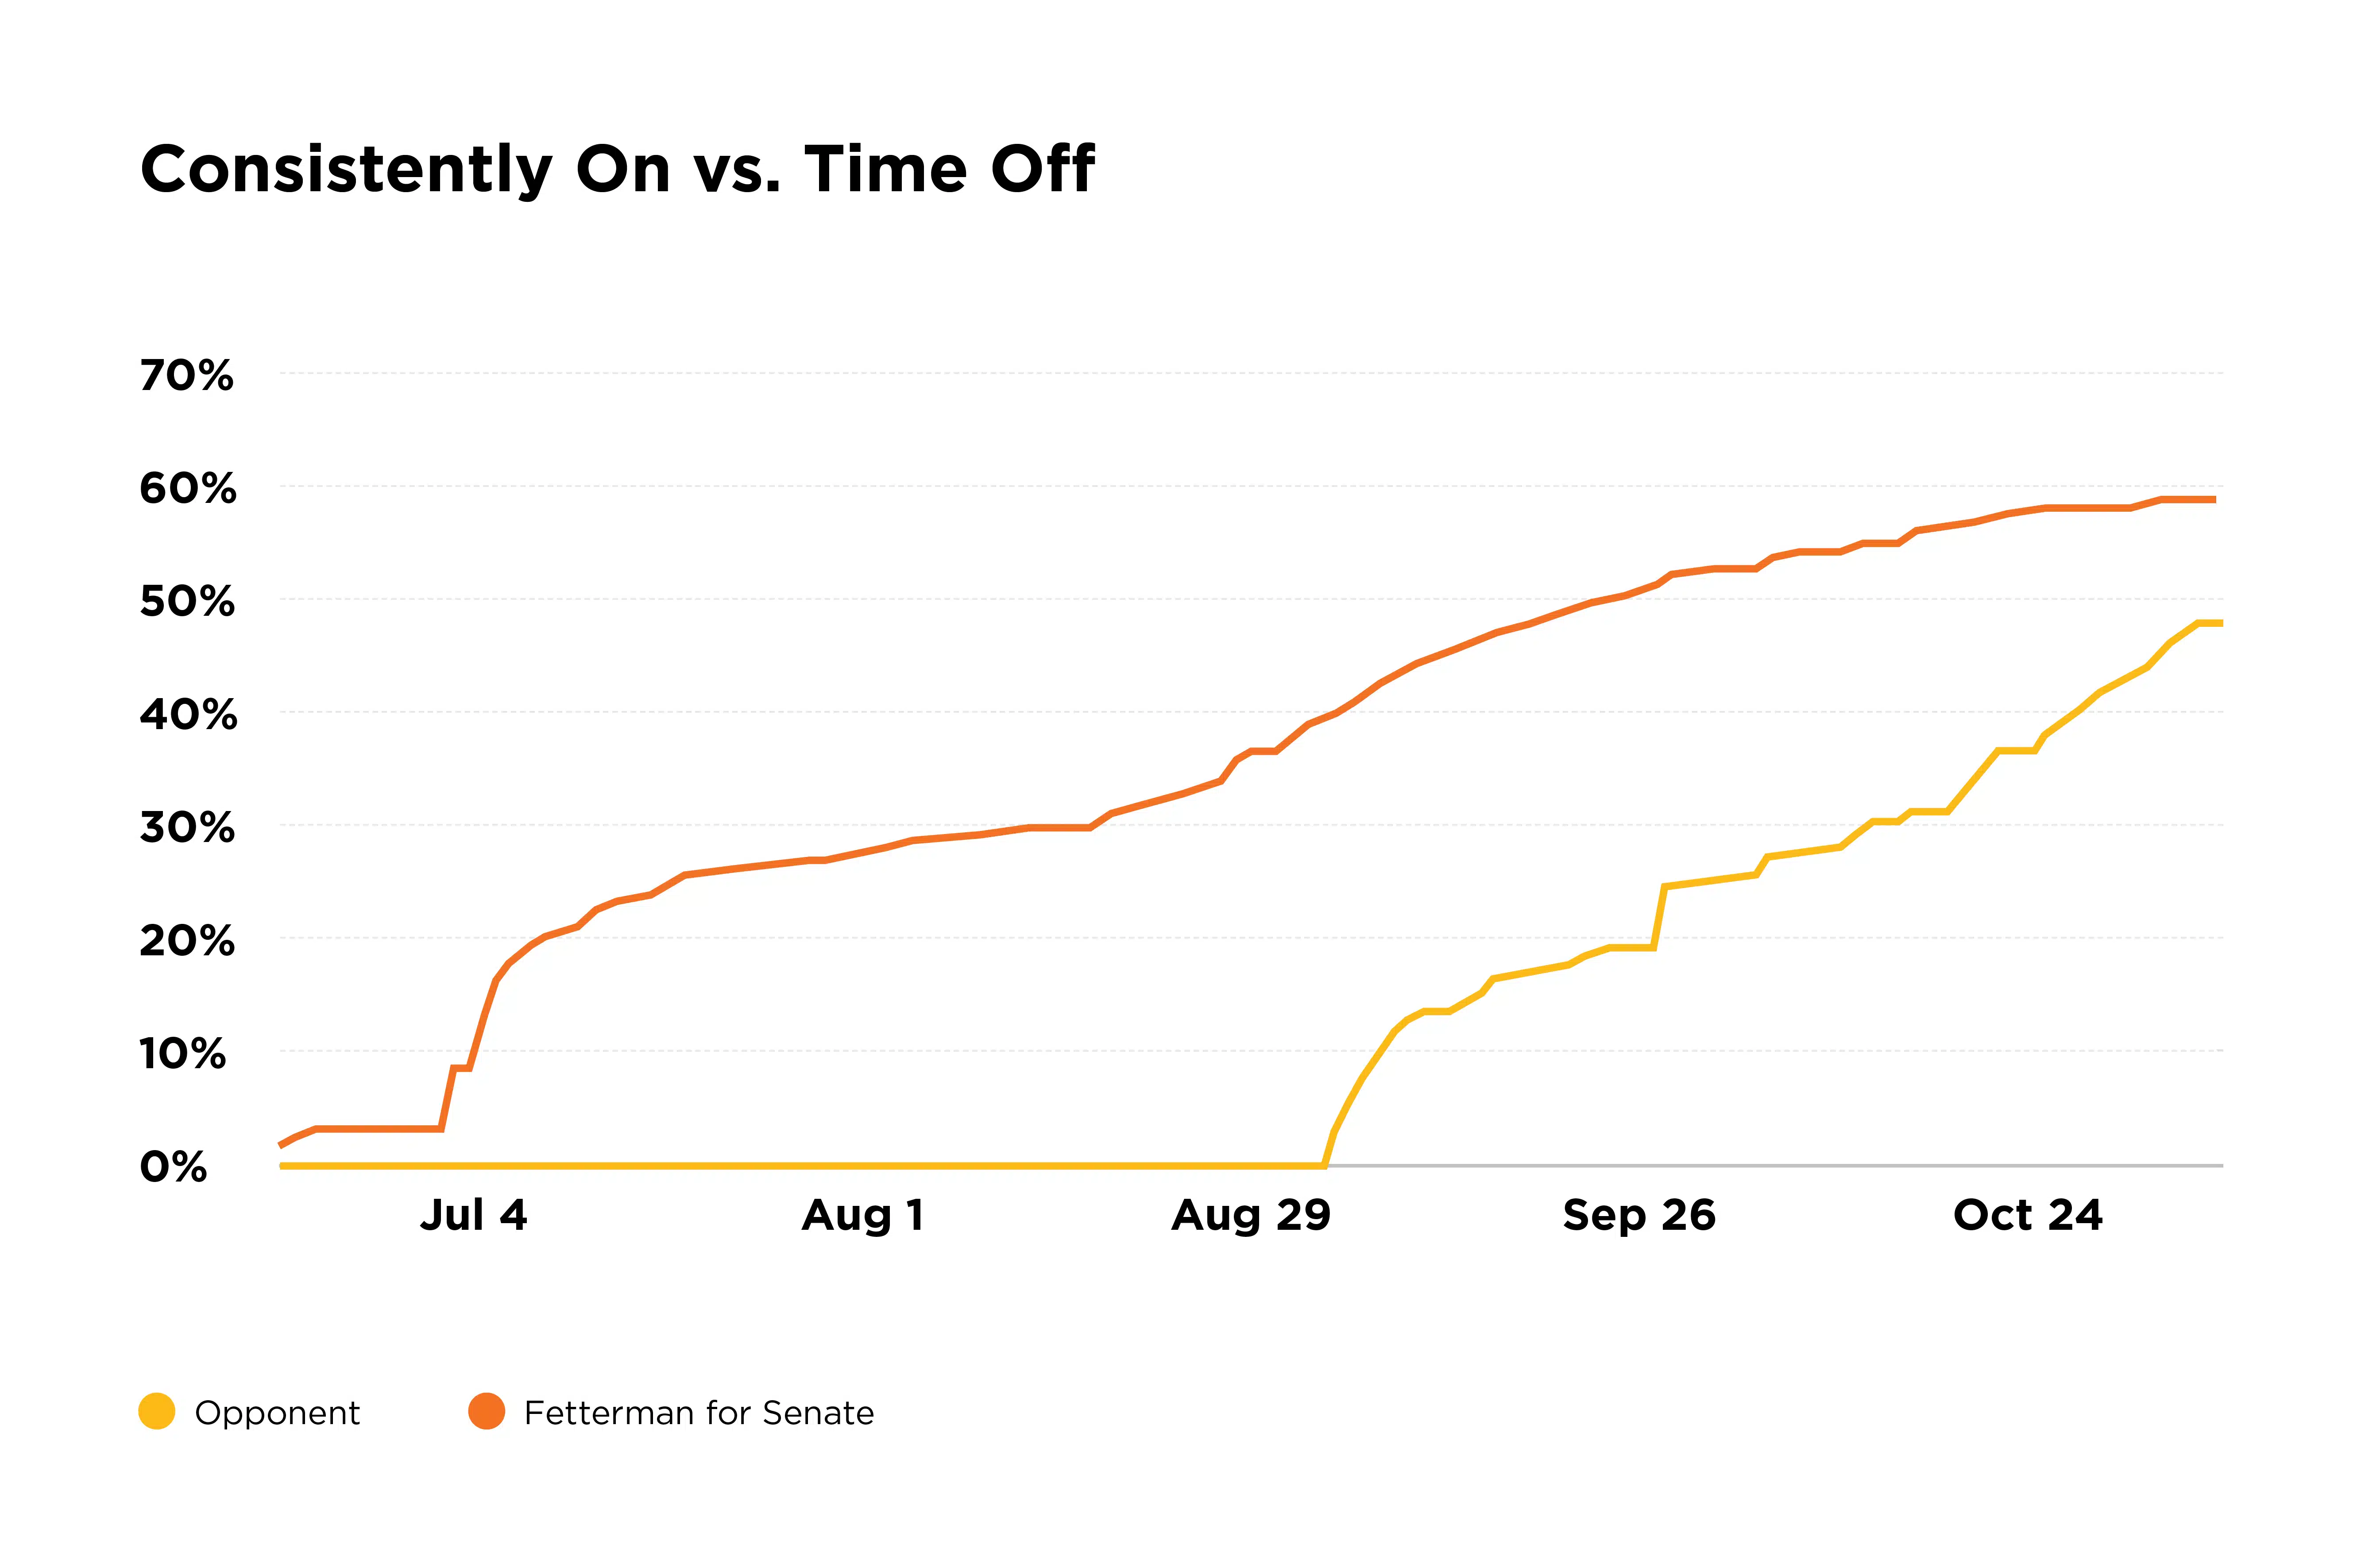 Line graph of the Fetterman for Senate campaign vs. an opponent over time consistently on vs. time off. Fetterman for Senate goes further than the opponent when consistently on.